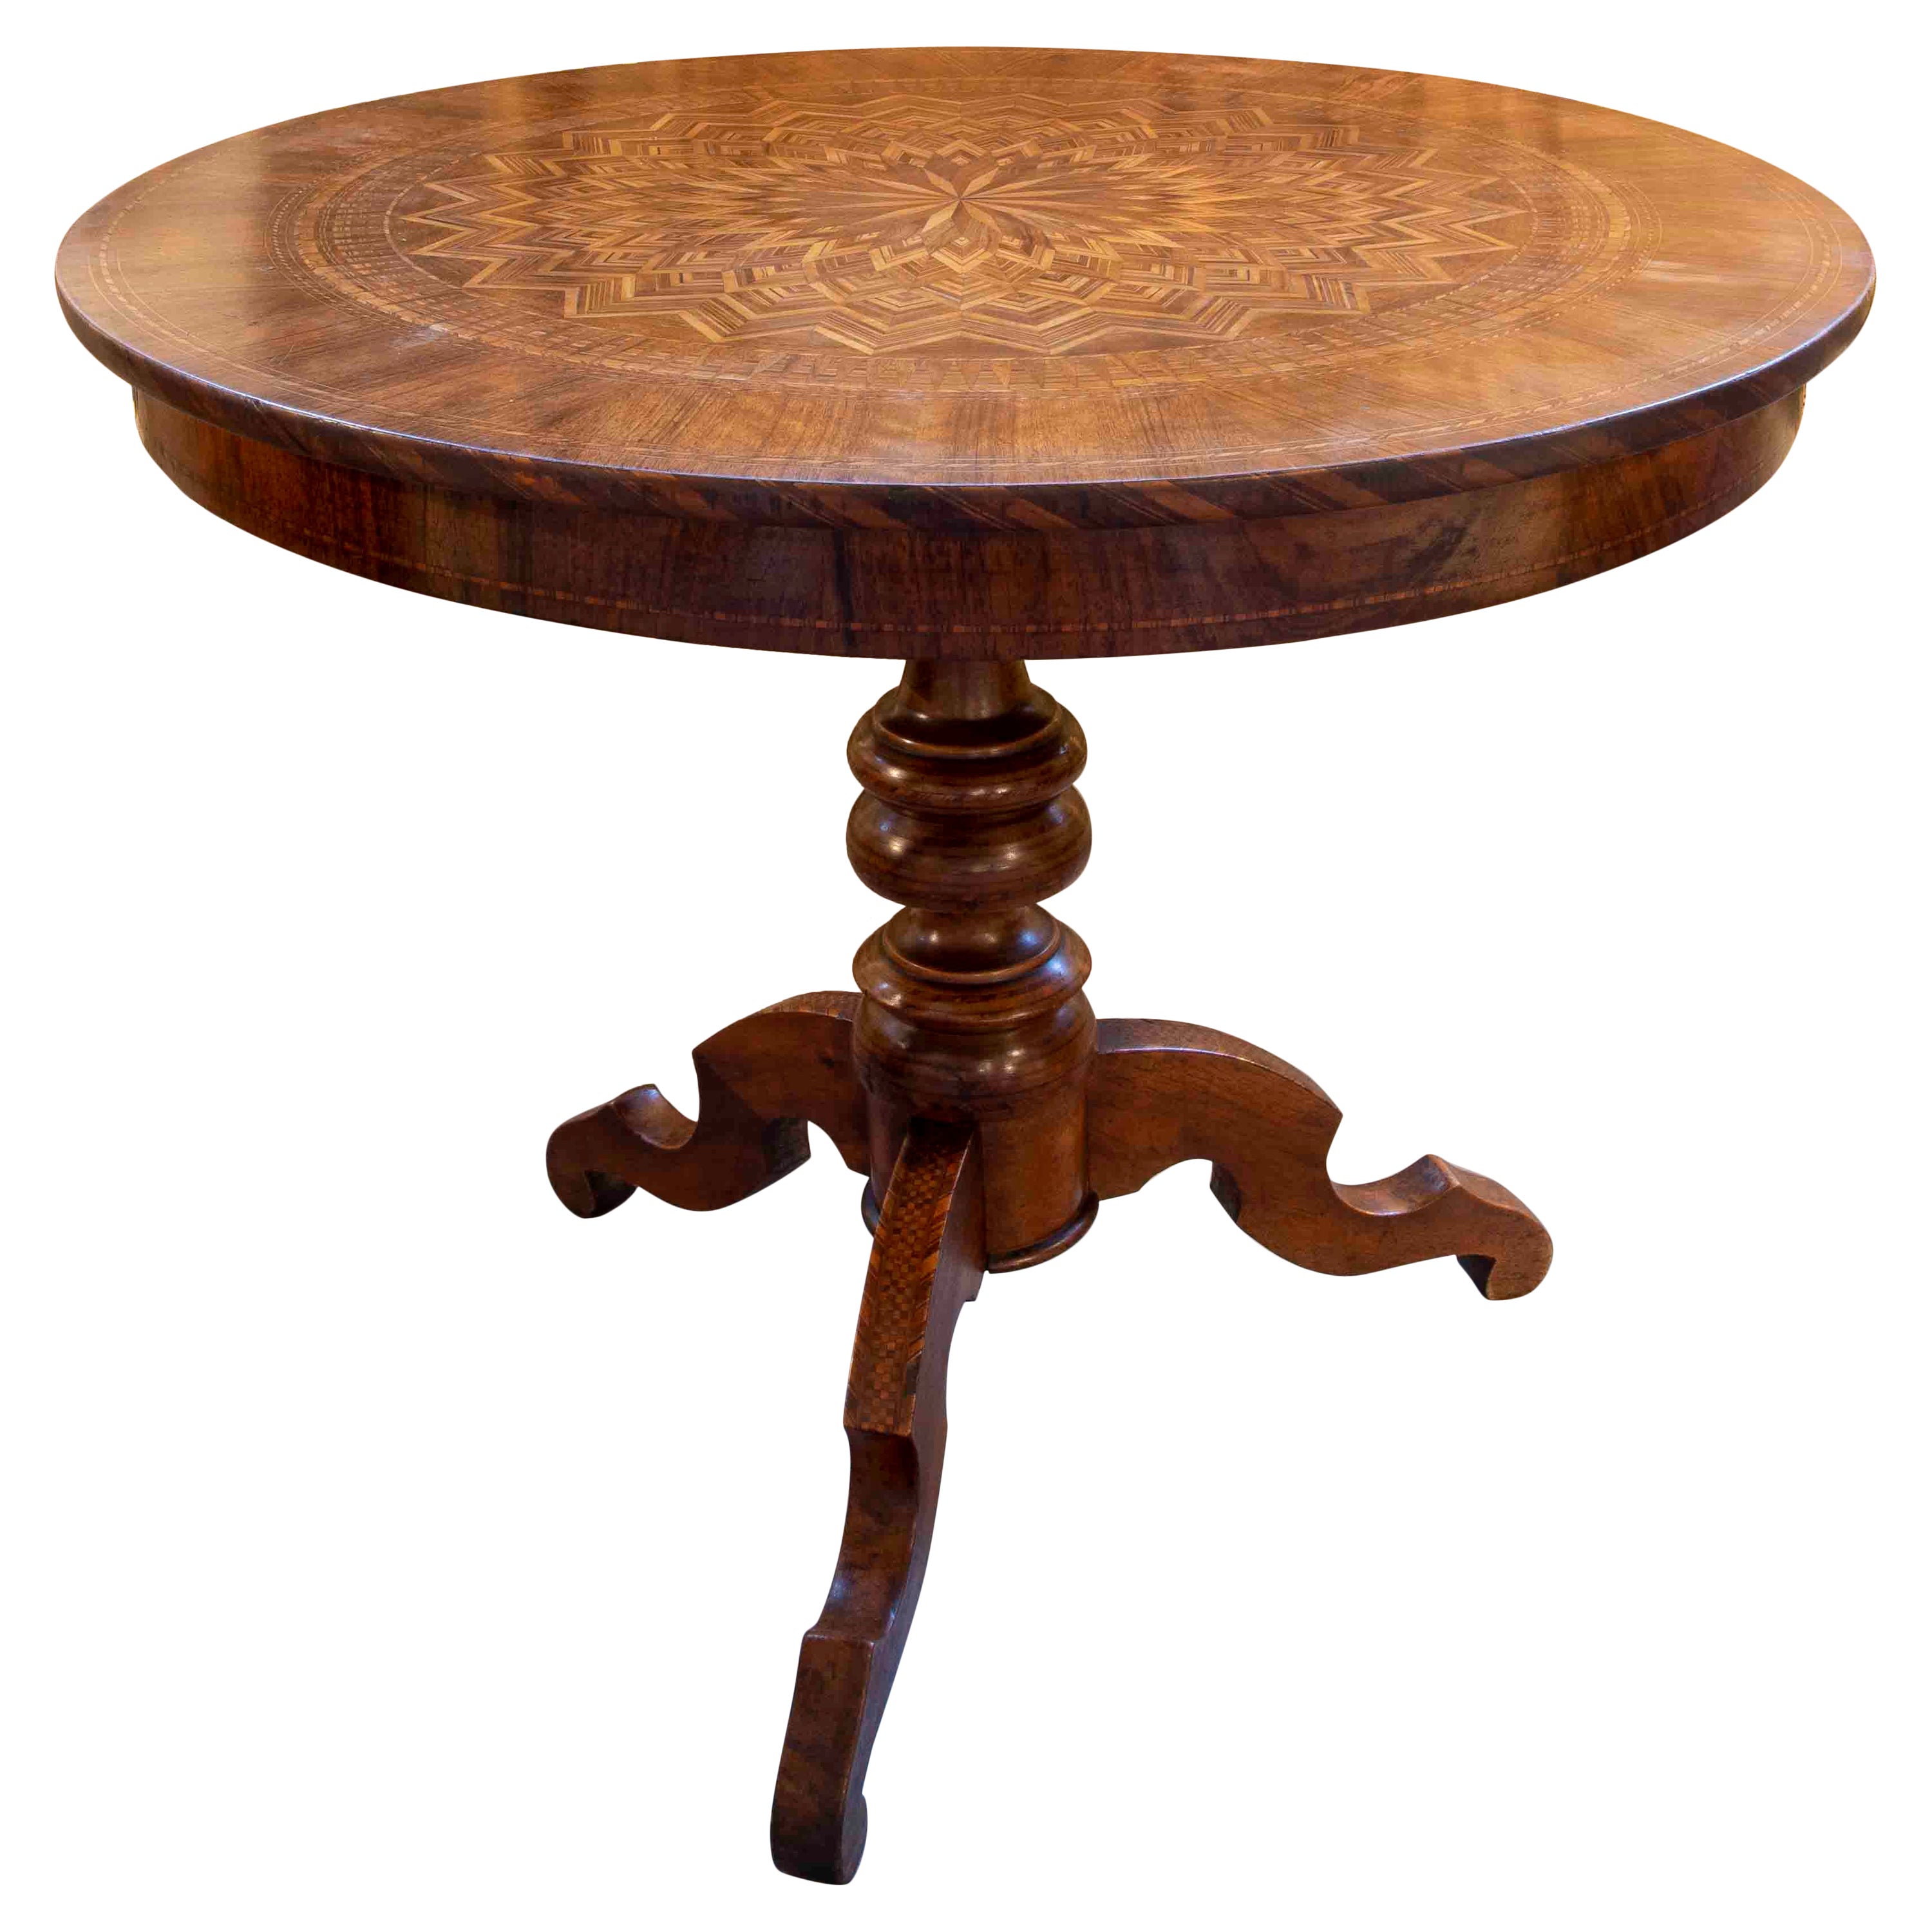 19th Century Round Wooden Table with Inlaid Table Top and Legs